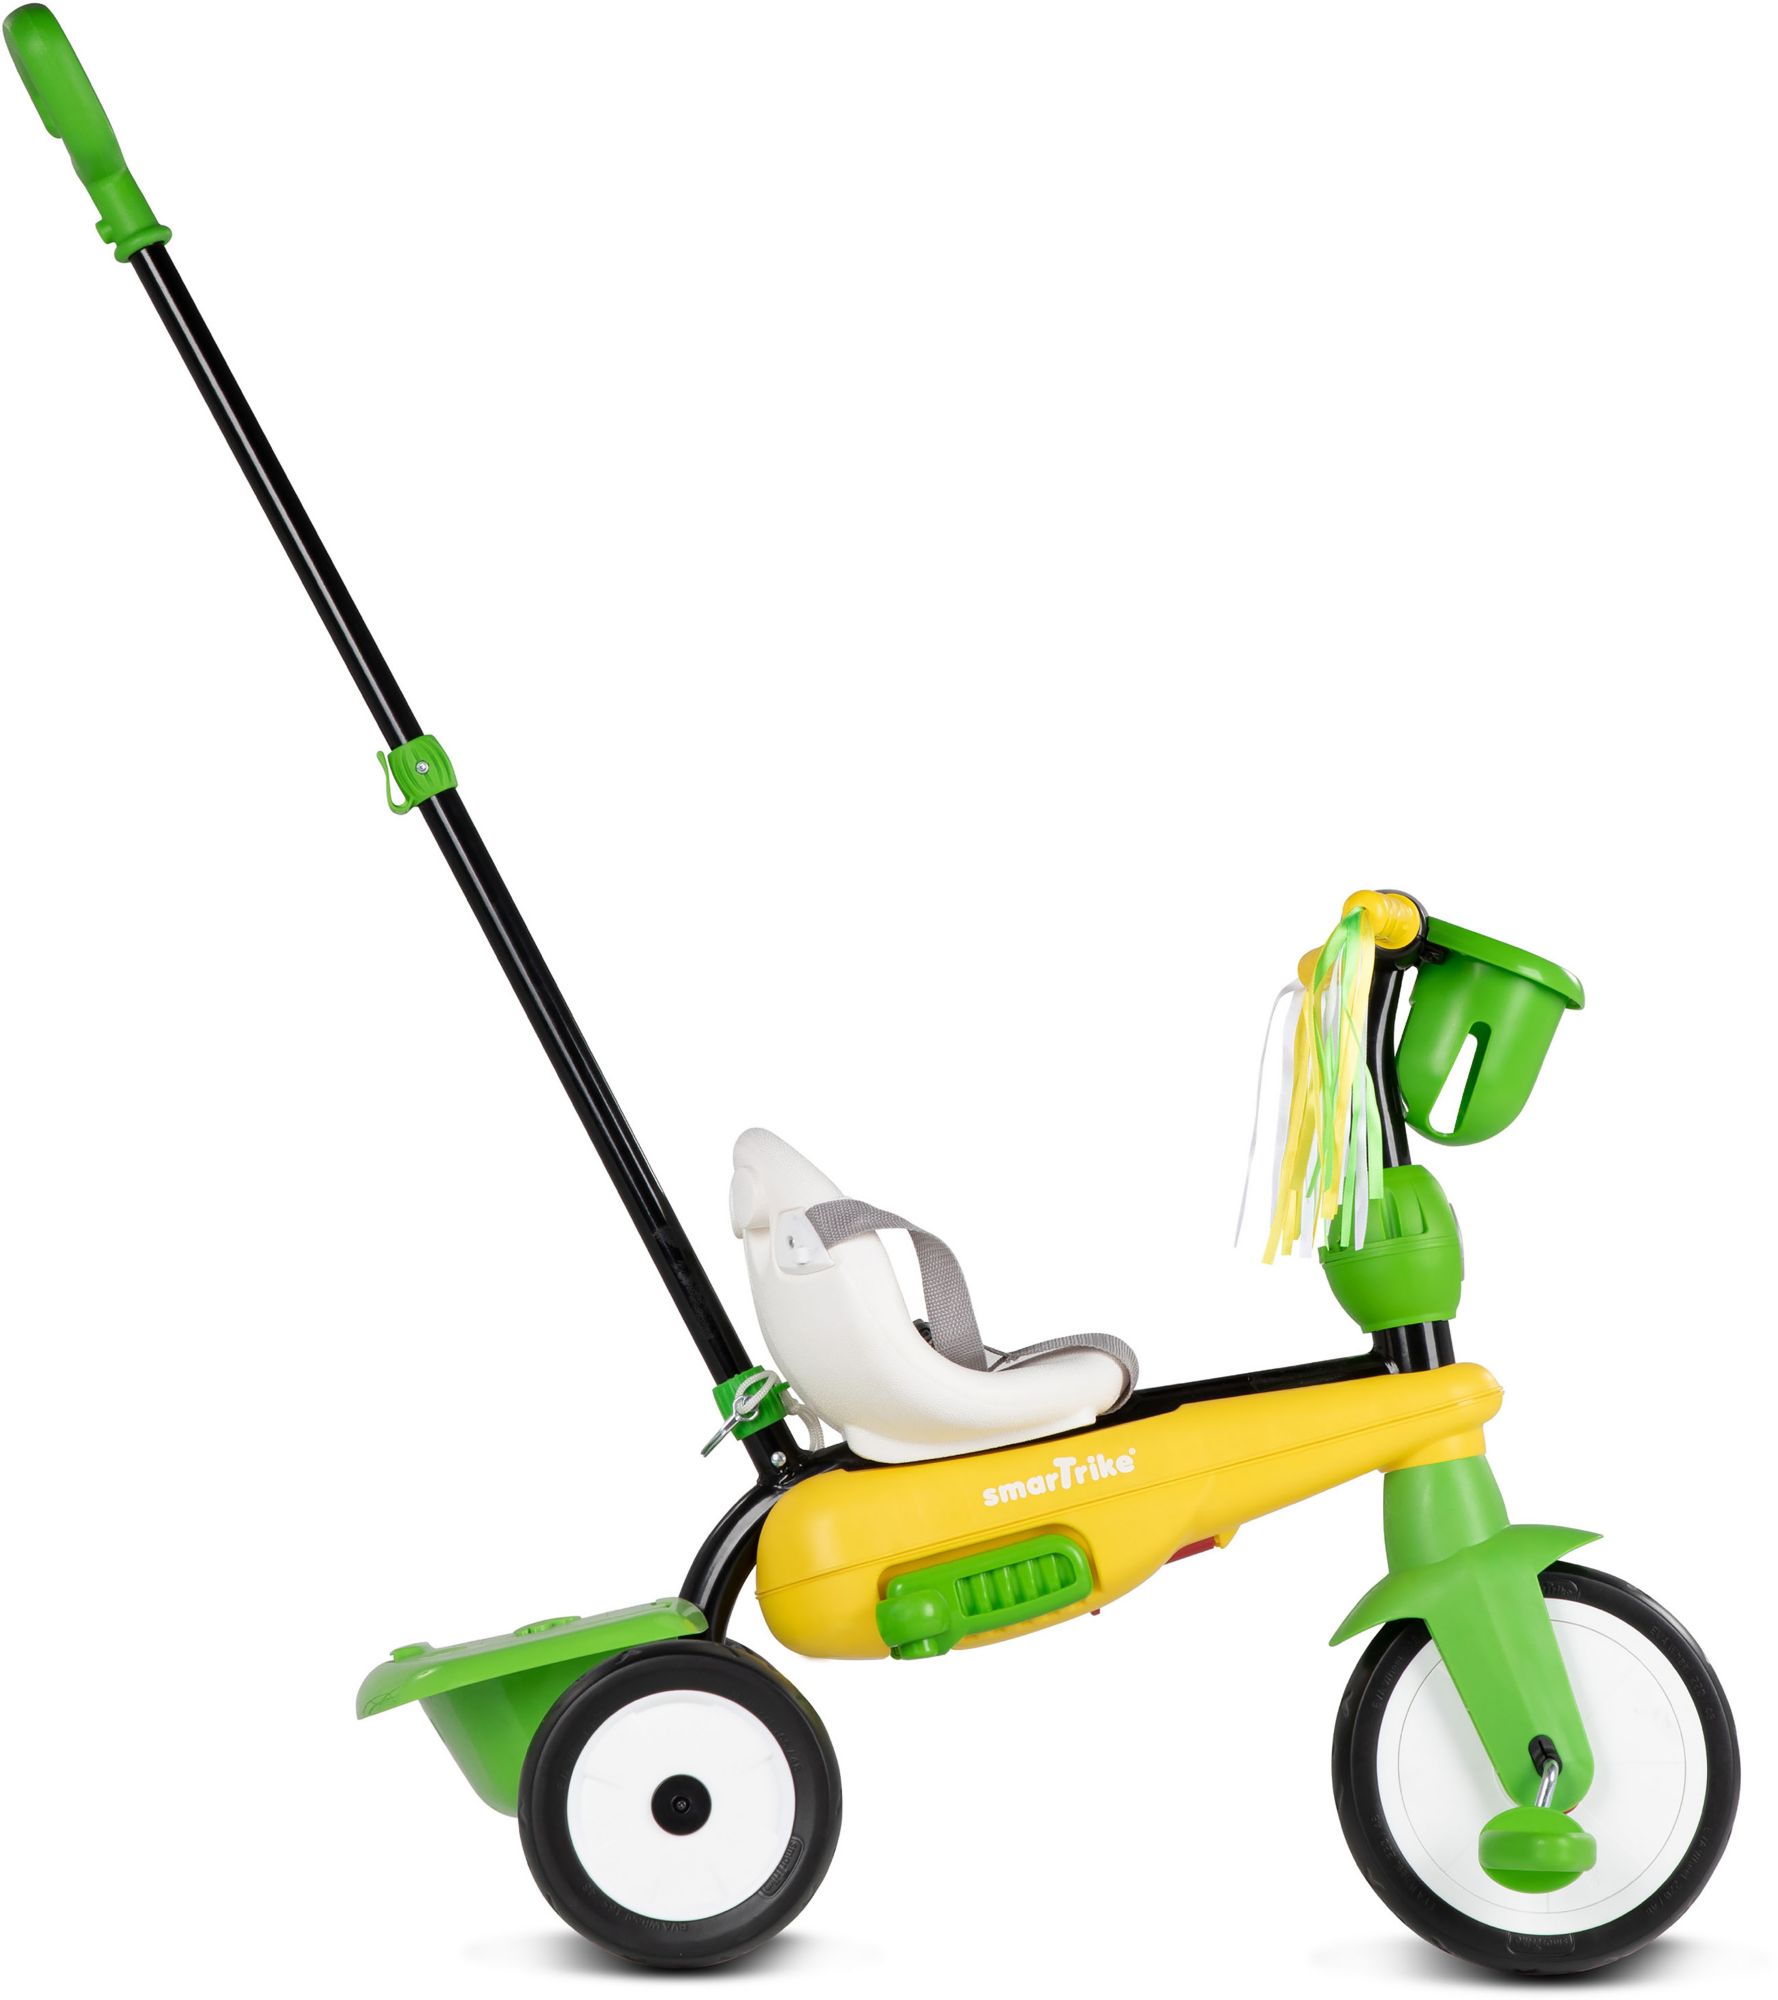 SmarTrike Breeze S 3-in-1 Toddler Tricycle